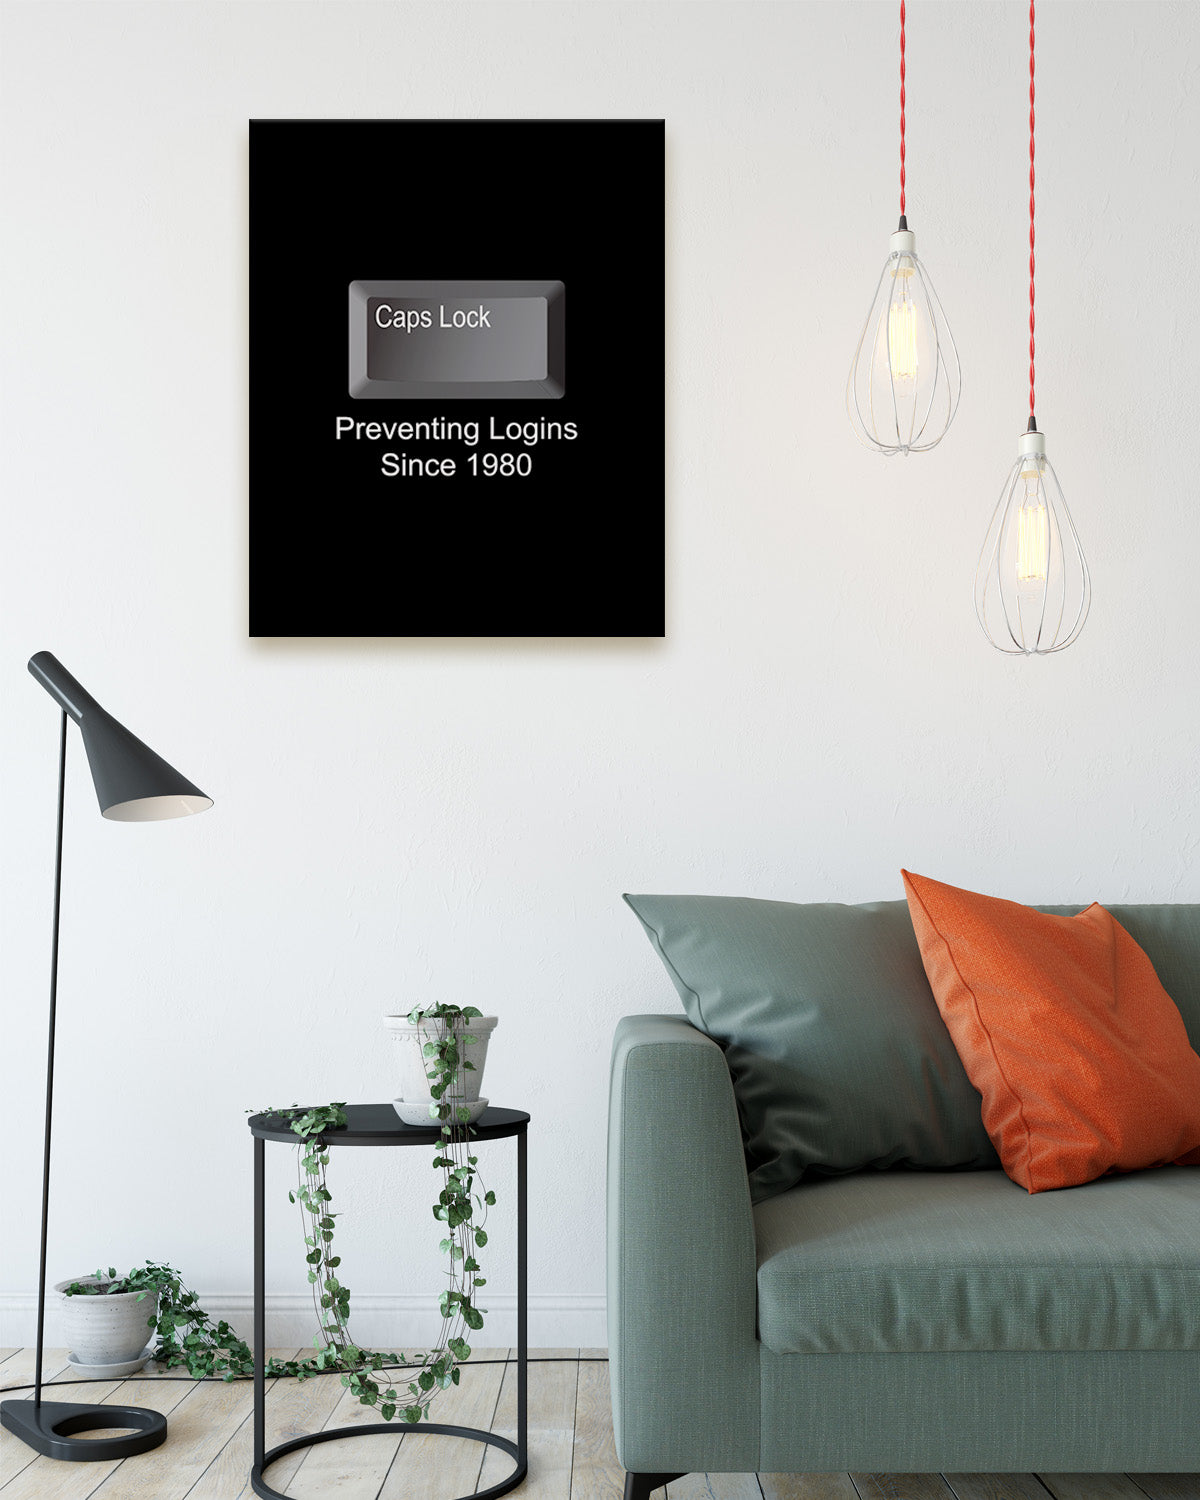 Preventing Logins Since 1980 Wall Decor Art Print on Black Background - computer programmer print - great gift for coding and computer science enthusiasts